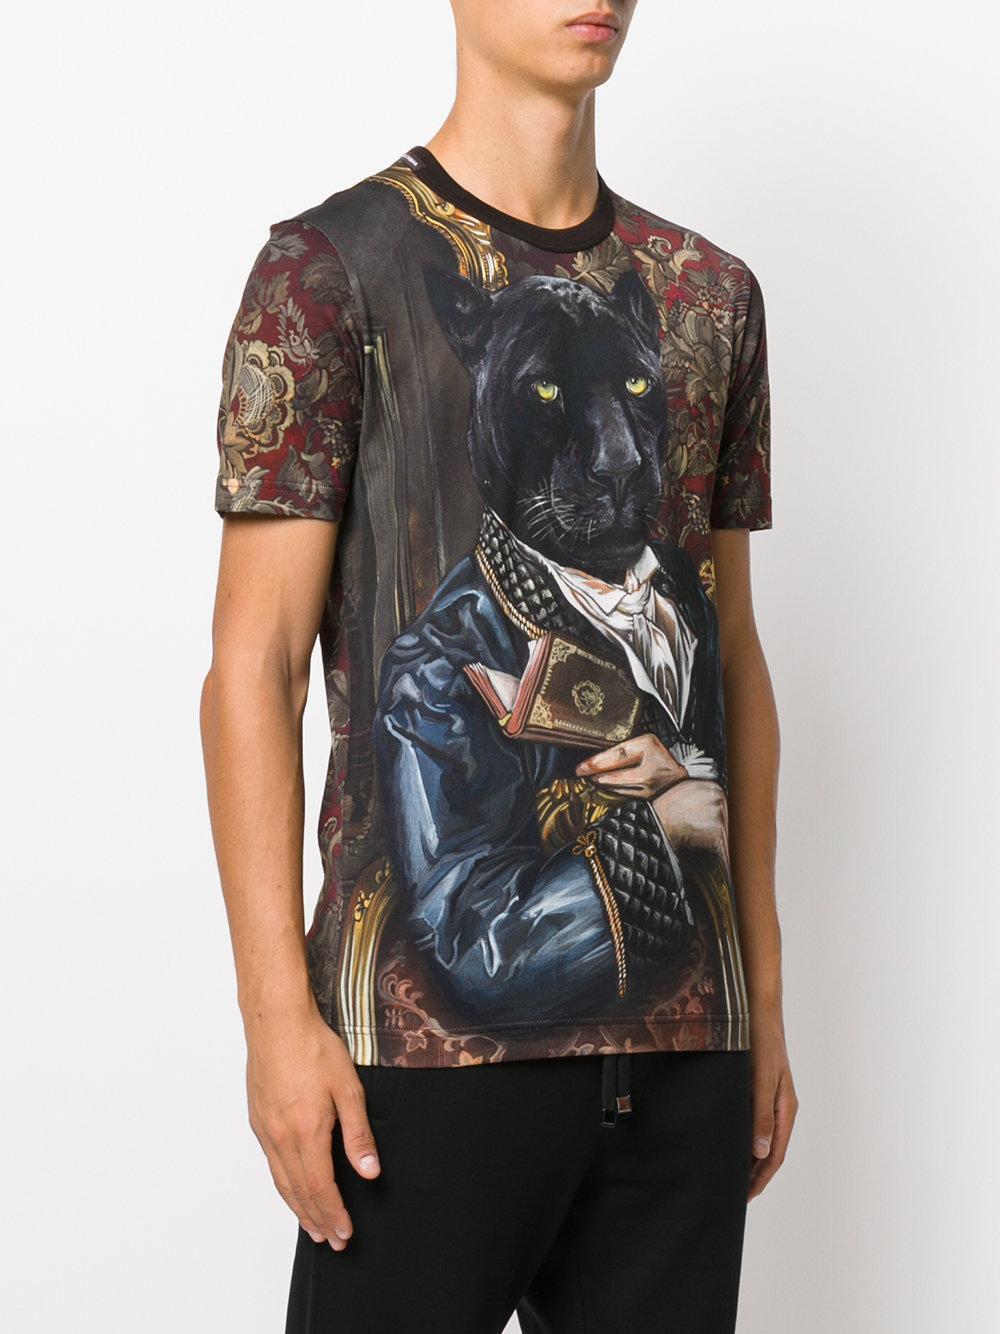 Dolce & Gabbana Cotton Panther Print T-shirt in Black for Men - Lyst